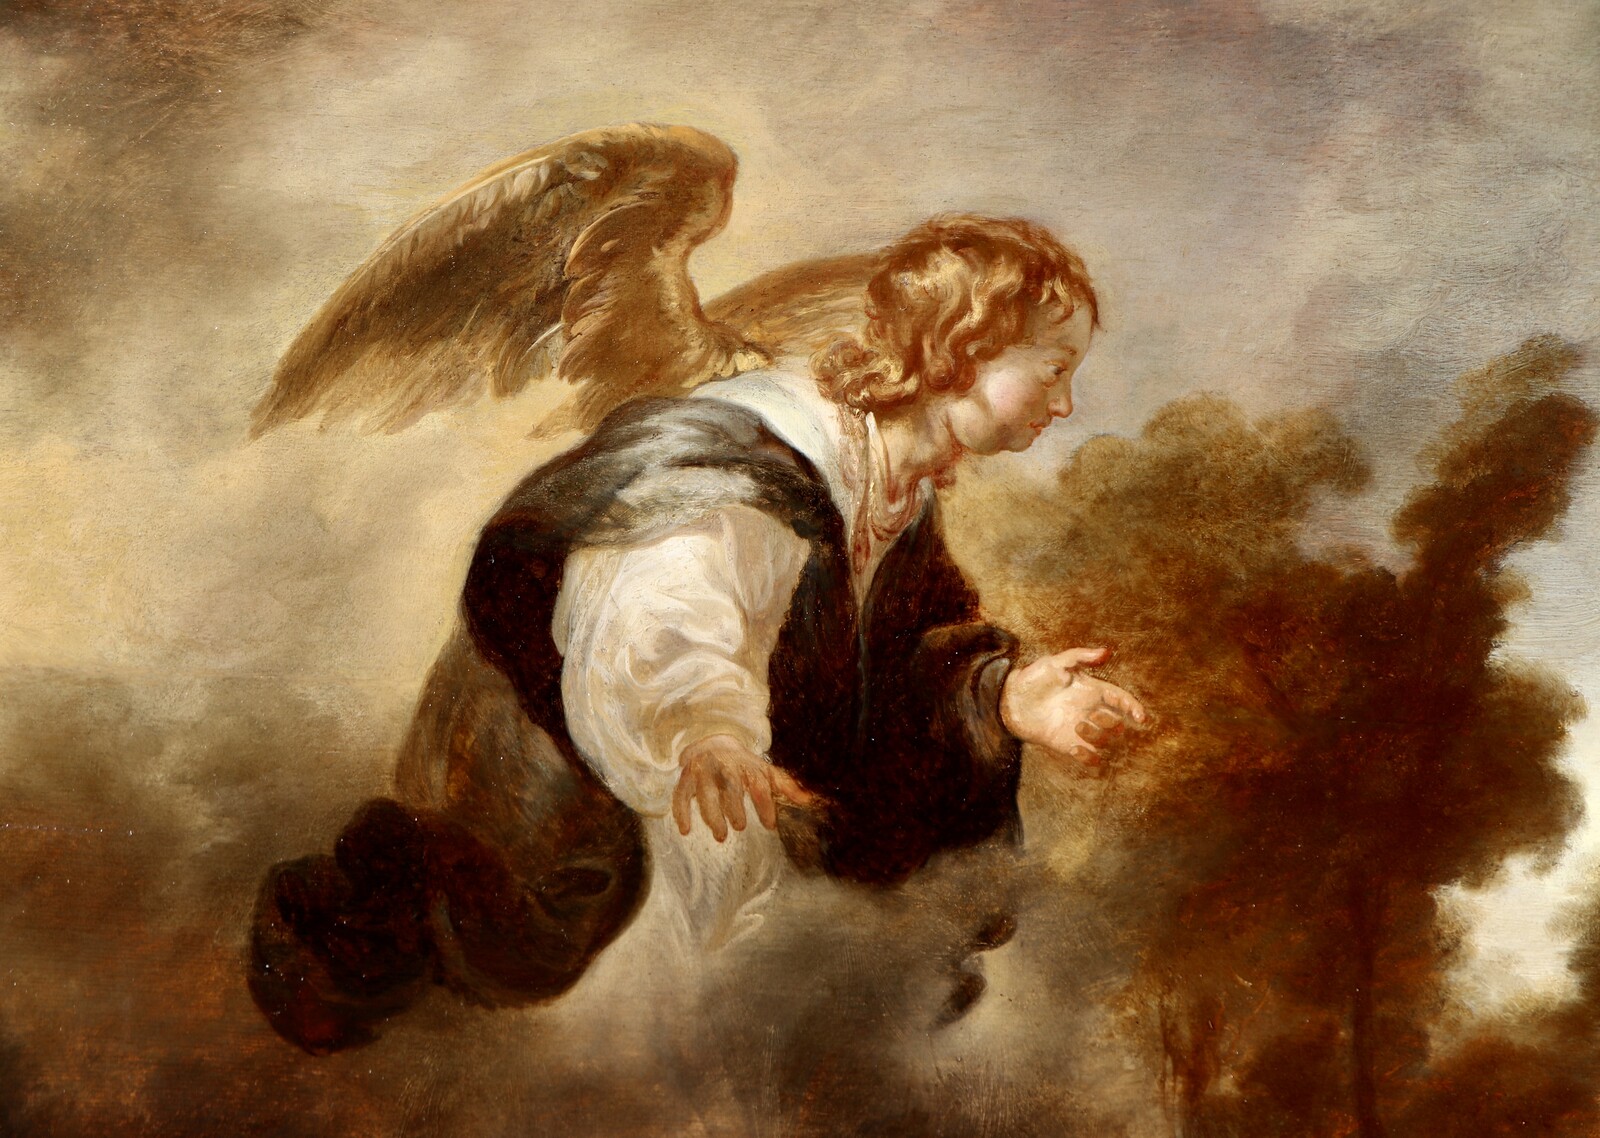 The Angel appears to Hagar